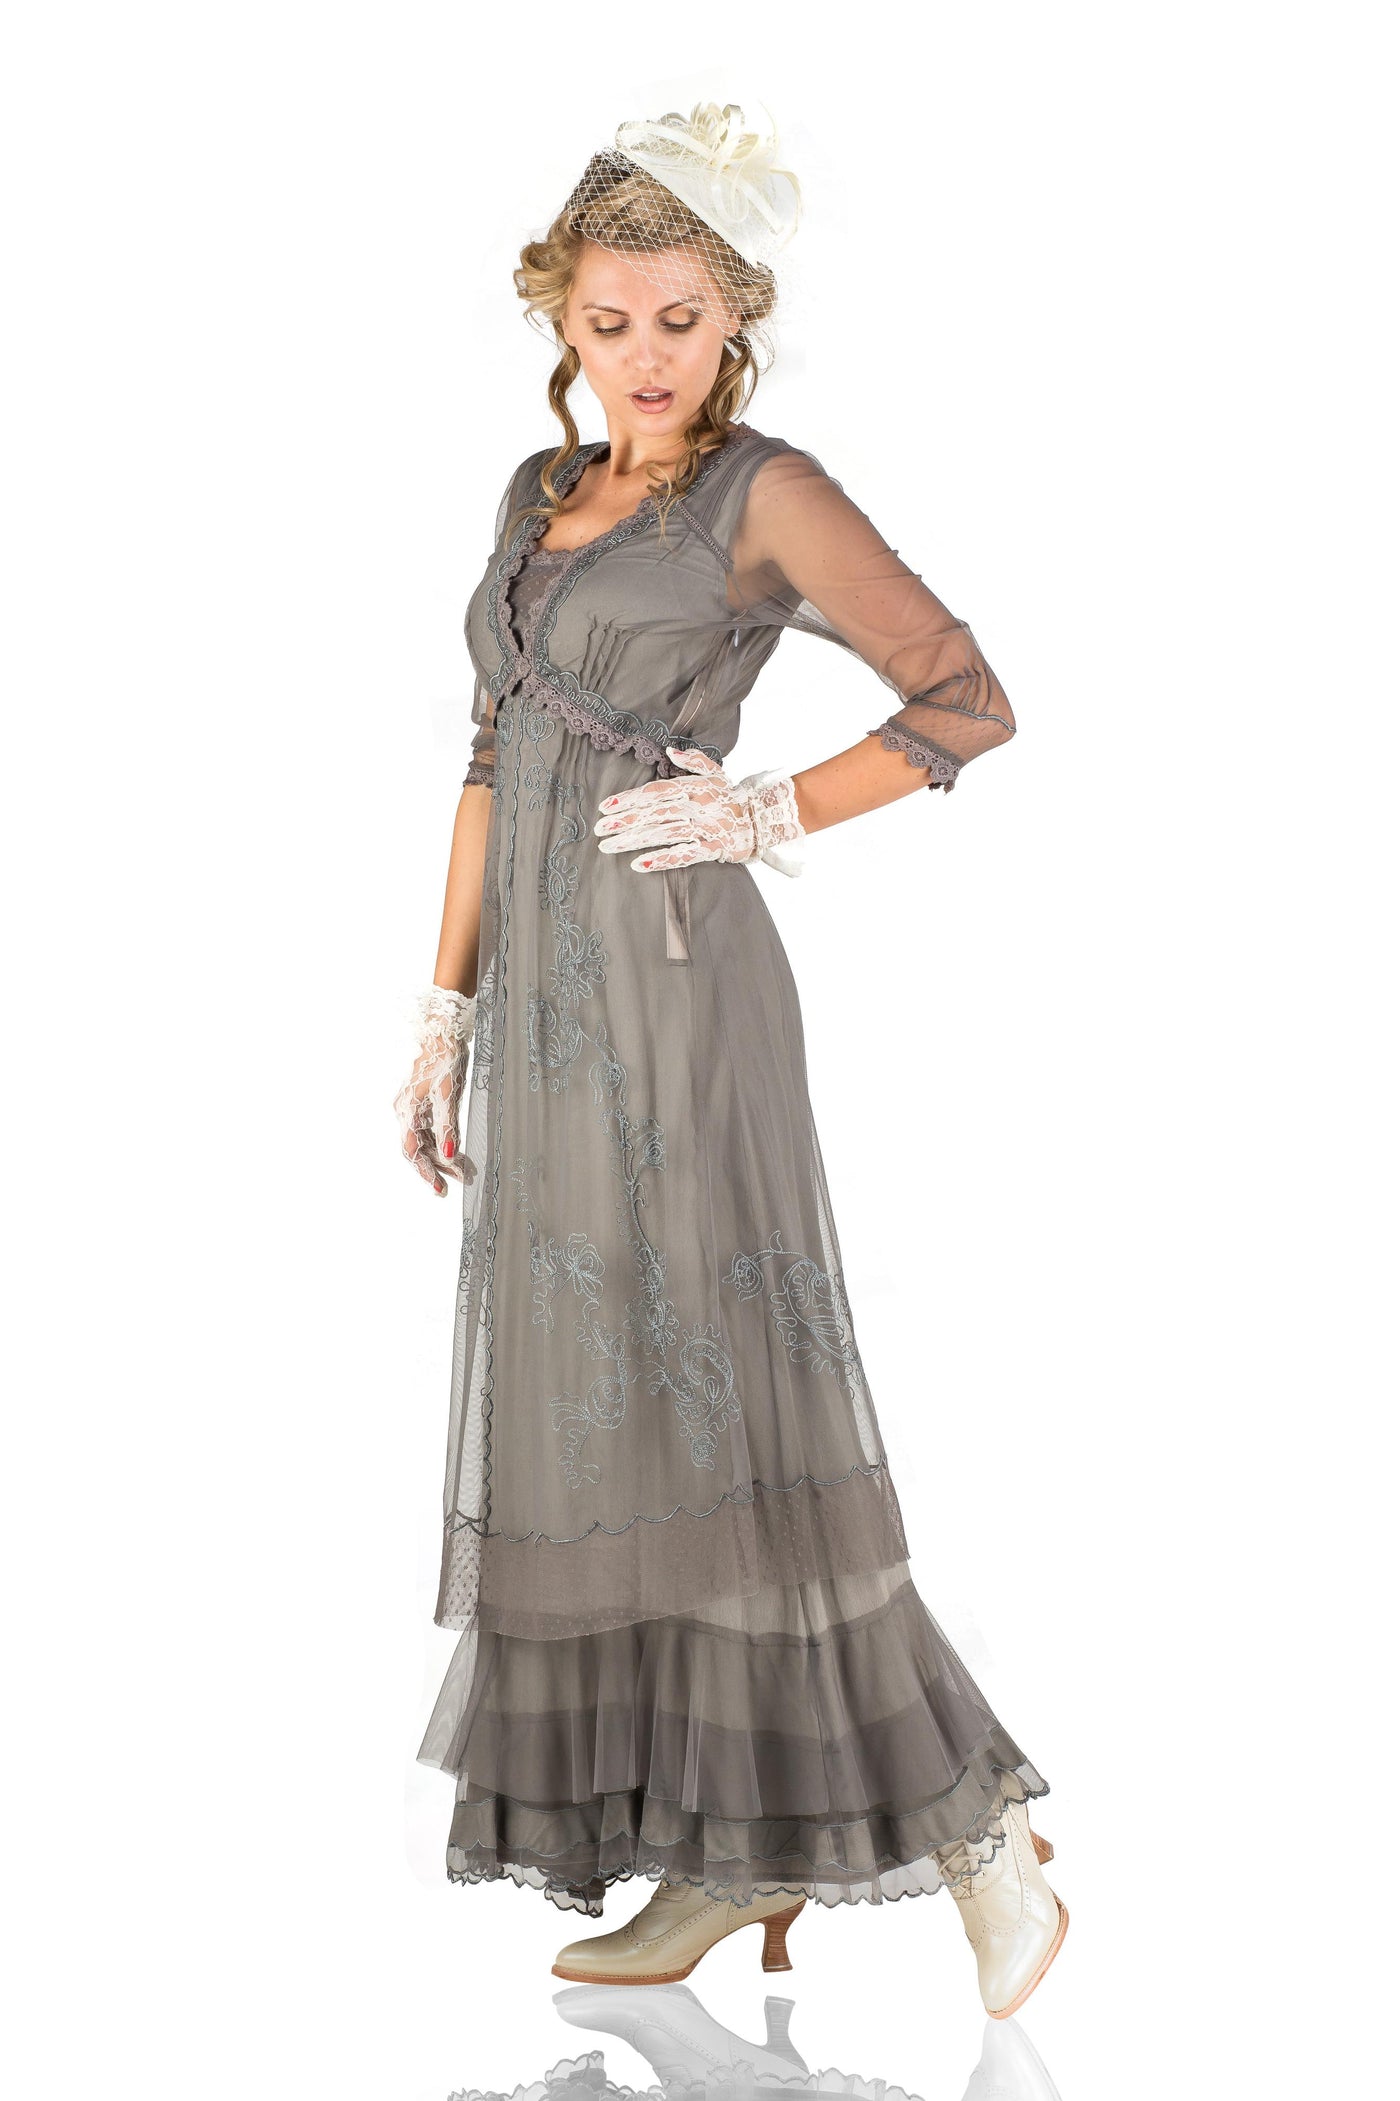 Audrey Vintage Style Party Gown CL-407 in Smoke by Nataya